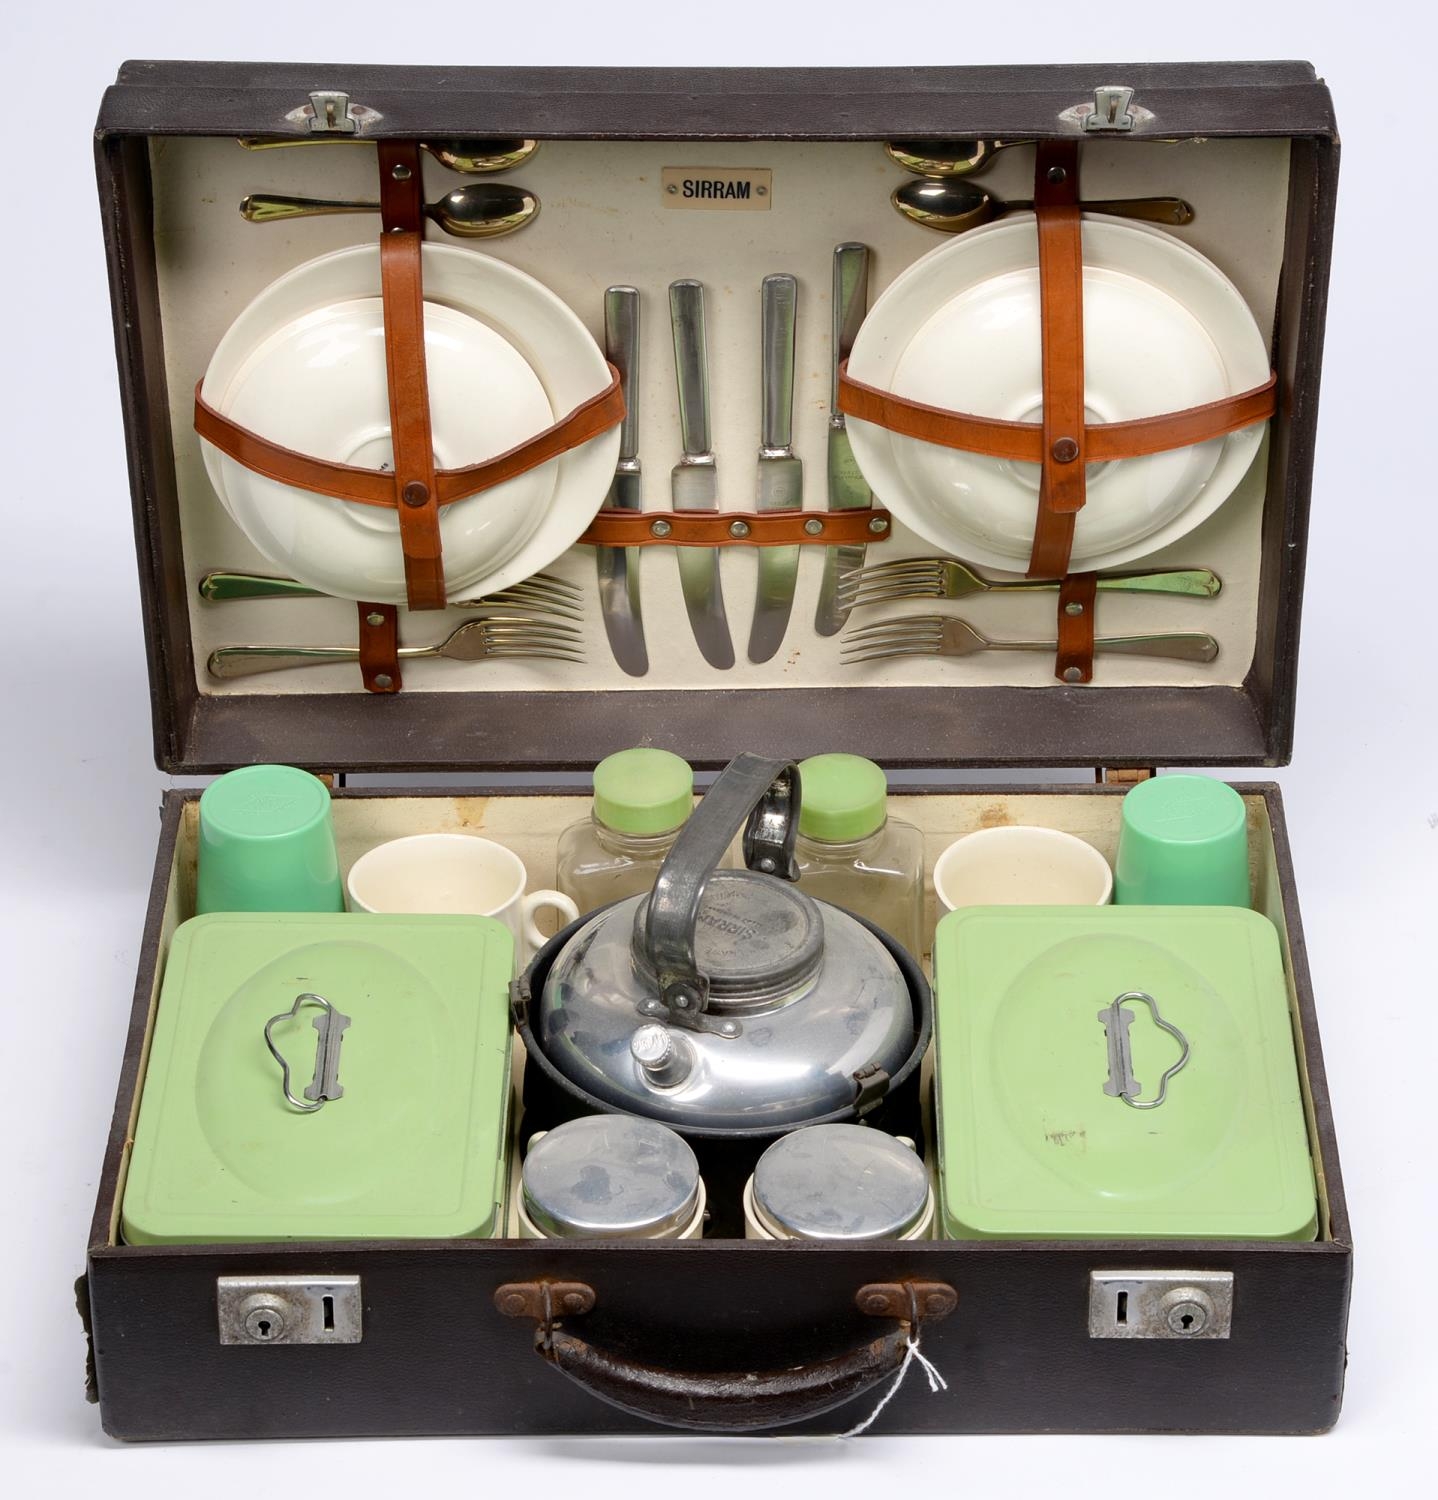 An early-mid 20th century motoring picnic case, by Sirram, four-setting, including flatware, ceramic